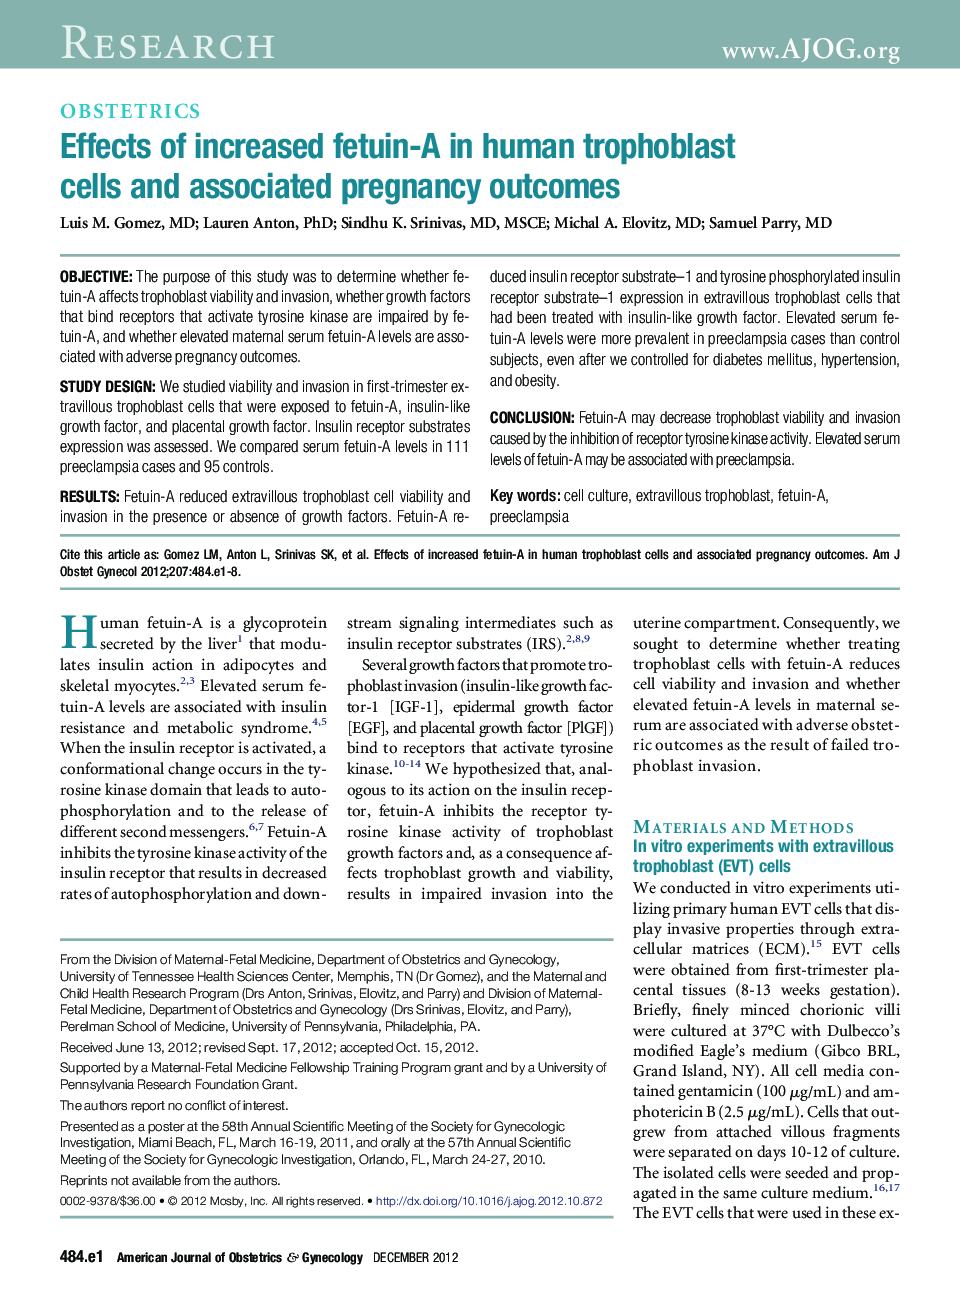 Effects of increased fetuin-A in human trophoblast cells and associated pregnancy outcomes